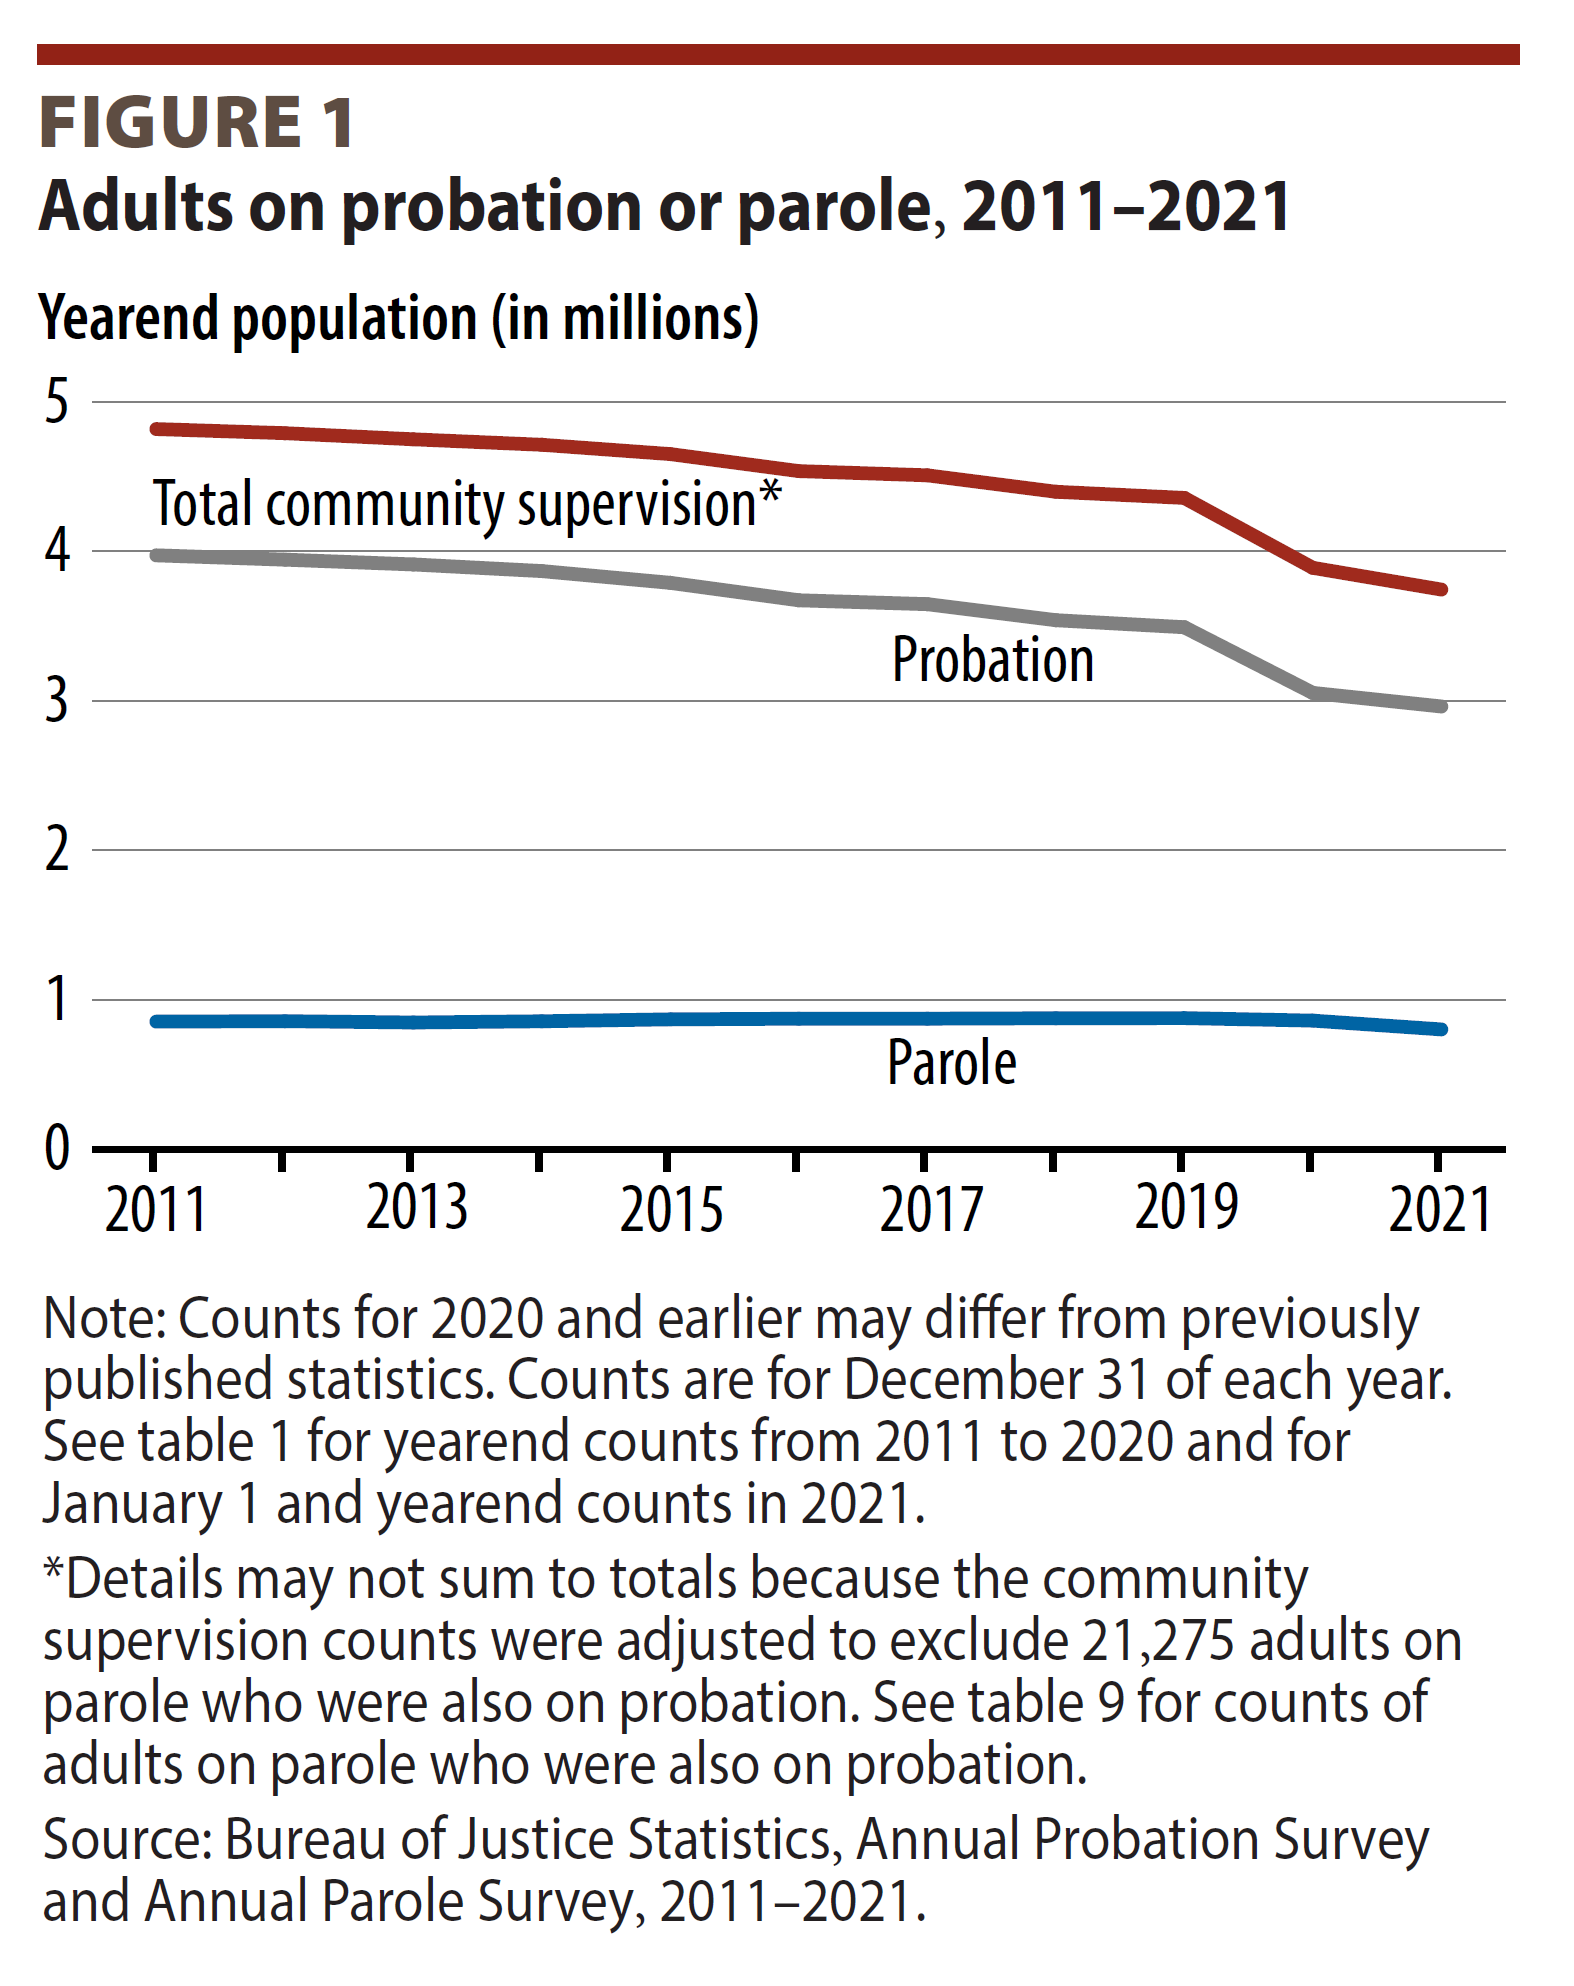 Graph of adults on probation or parole 2011-2021. Total community supervision (declining). Probation (declining), and Parole (declining)